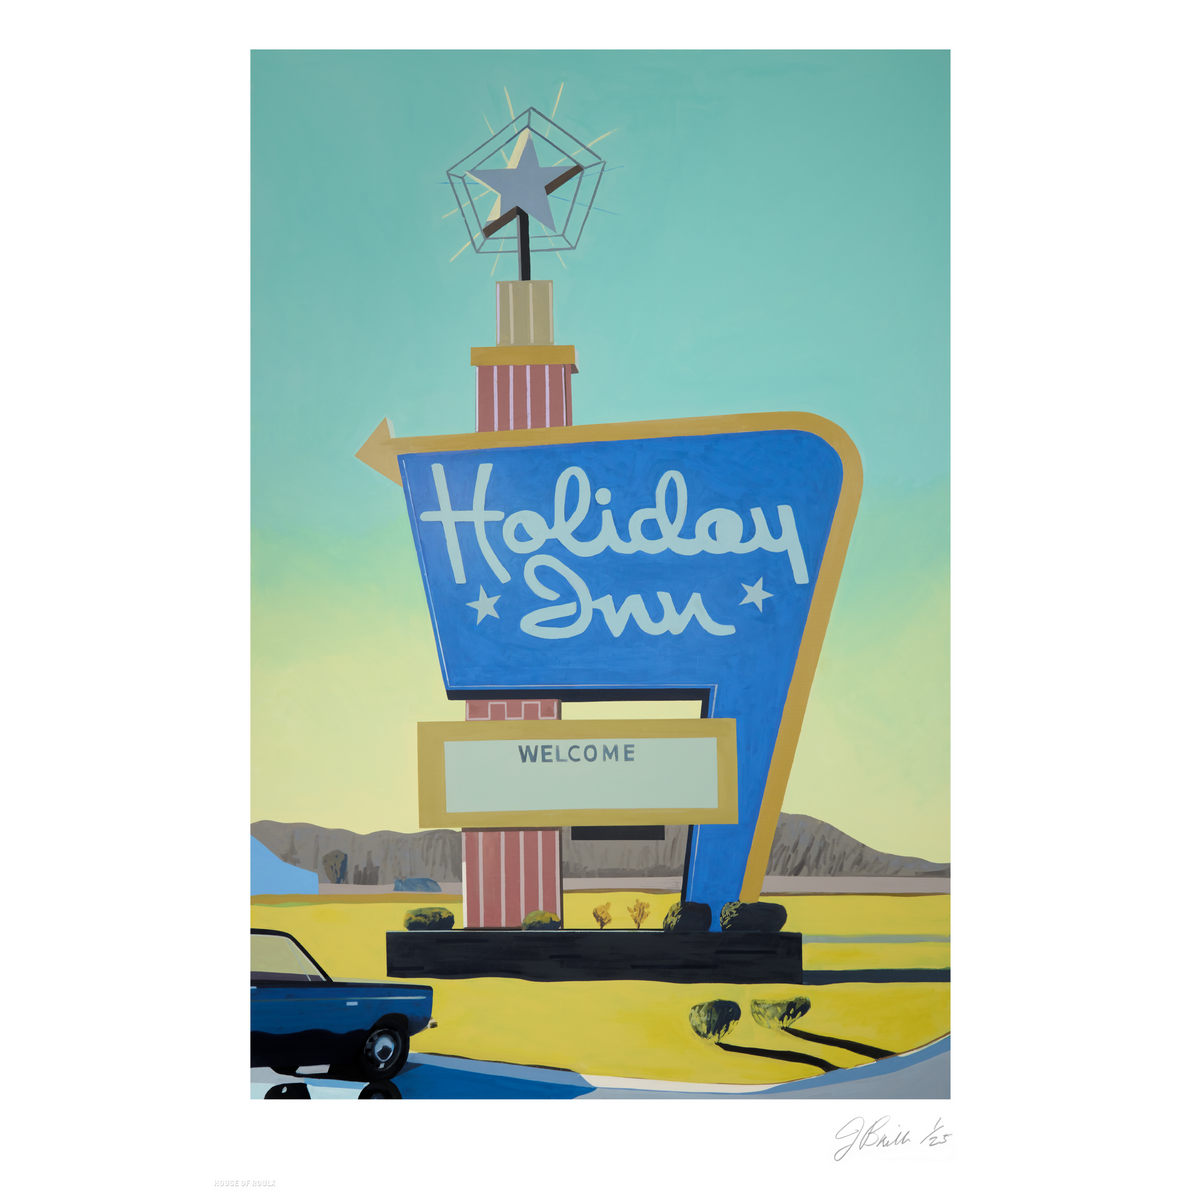 Jessica Brilli &quot;Holiday Inn&quot; - Archival Print, Limited Edition of 25 - 16 x 24&quot;